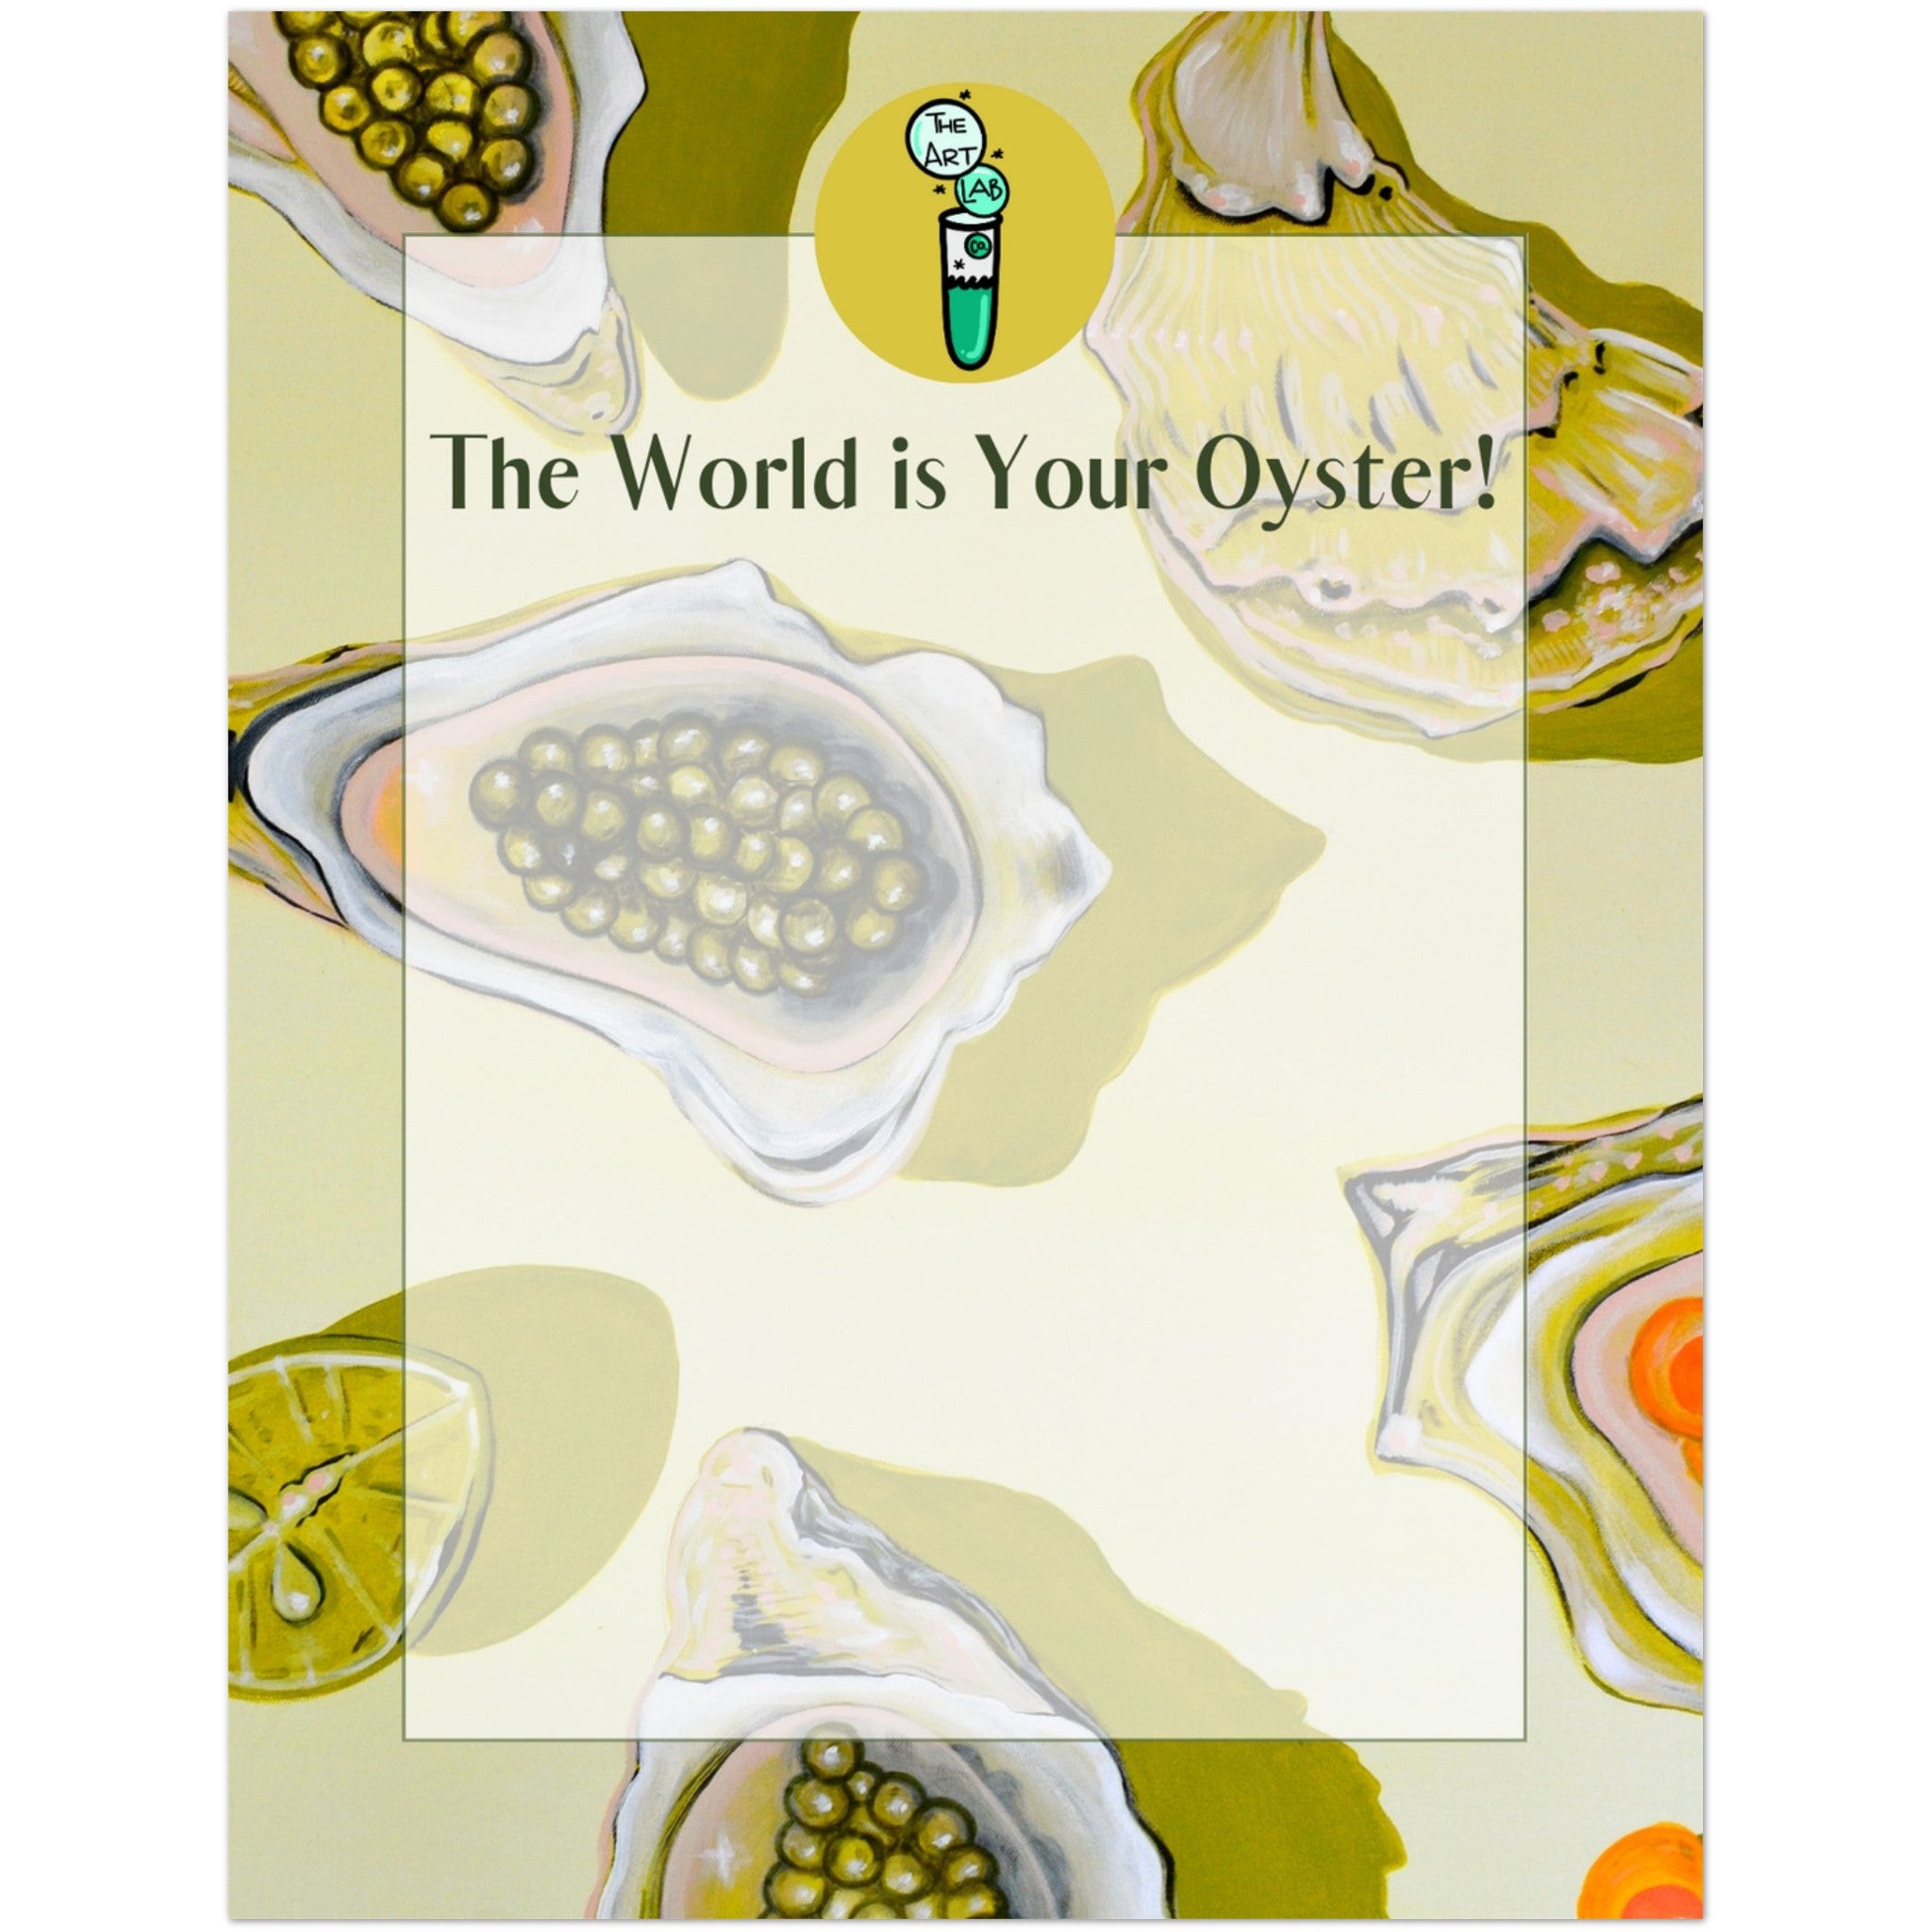 Pack of 10 "The World is Your Oyster!" Oyster Postcards + Envelopes